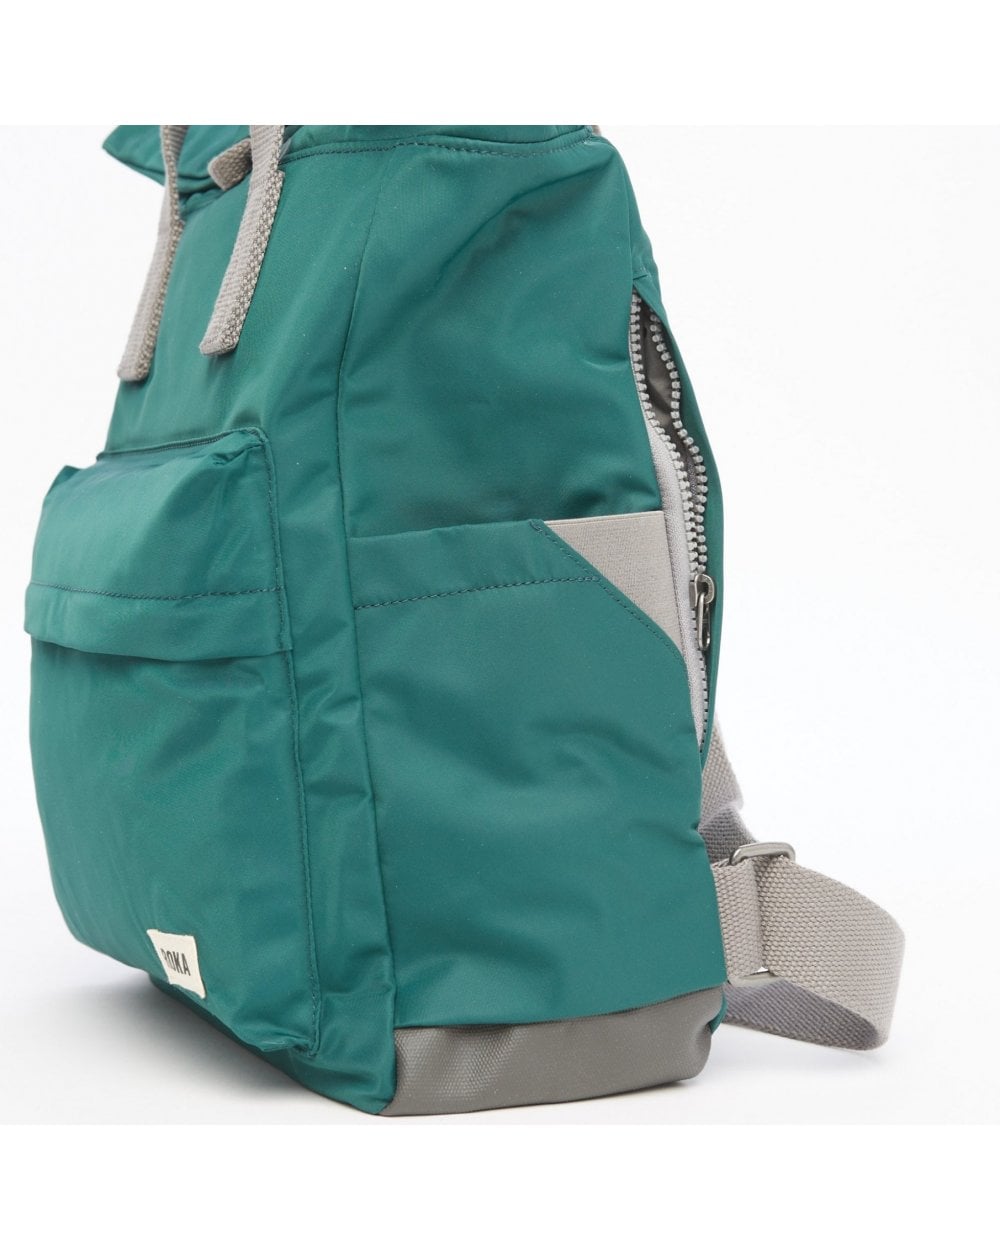 Canfield B Sustainable Teal Medium Backpack